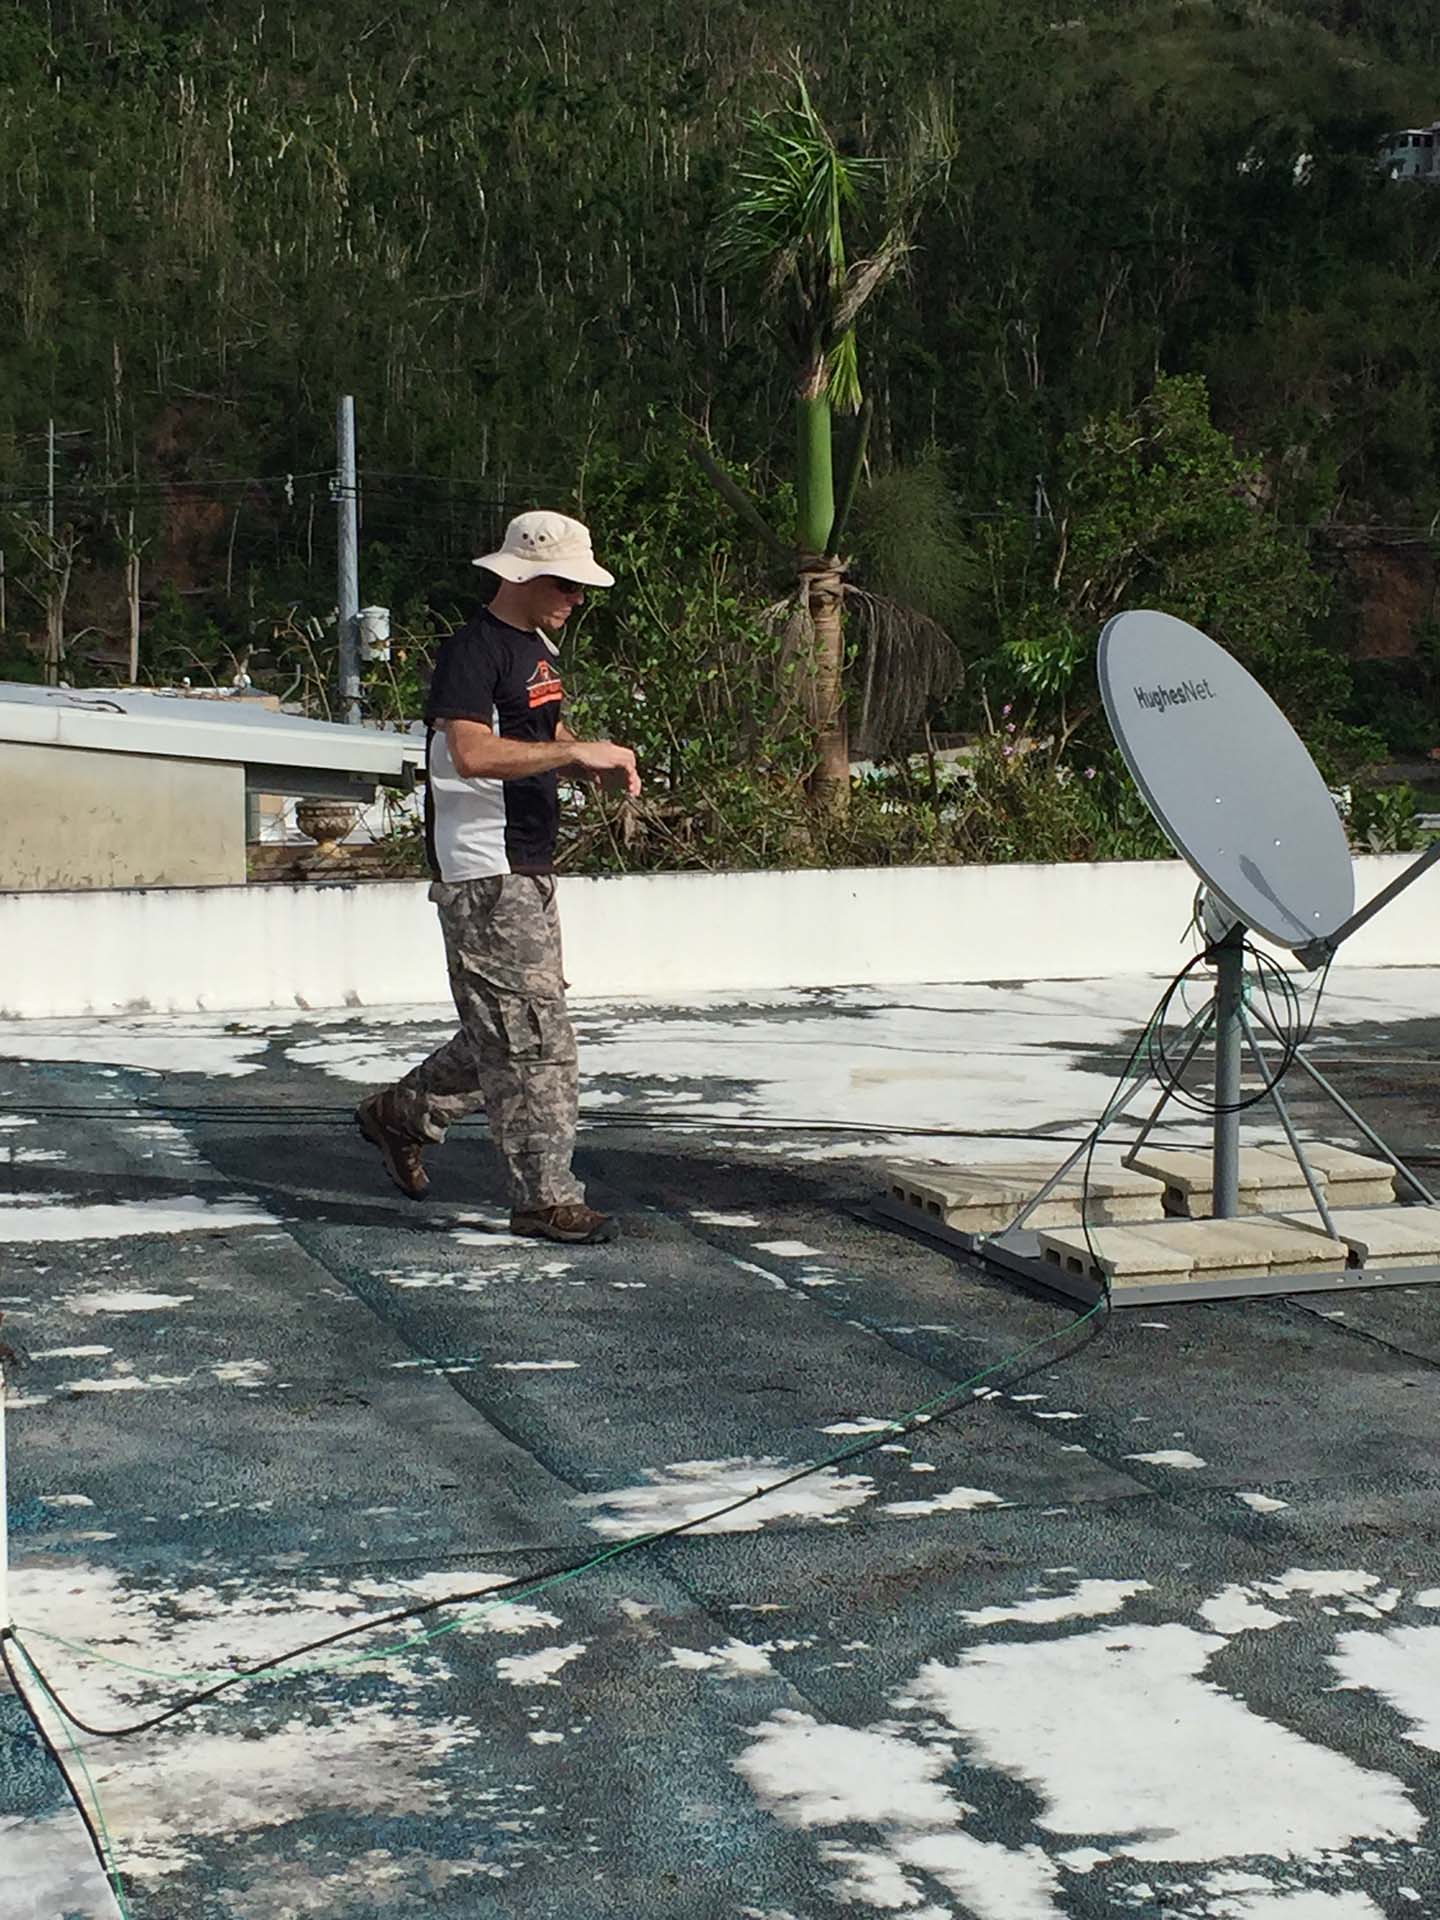 Merheb and his team began establishing free internet hotspots in areas of Puerto Rico that had been cut off